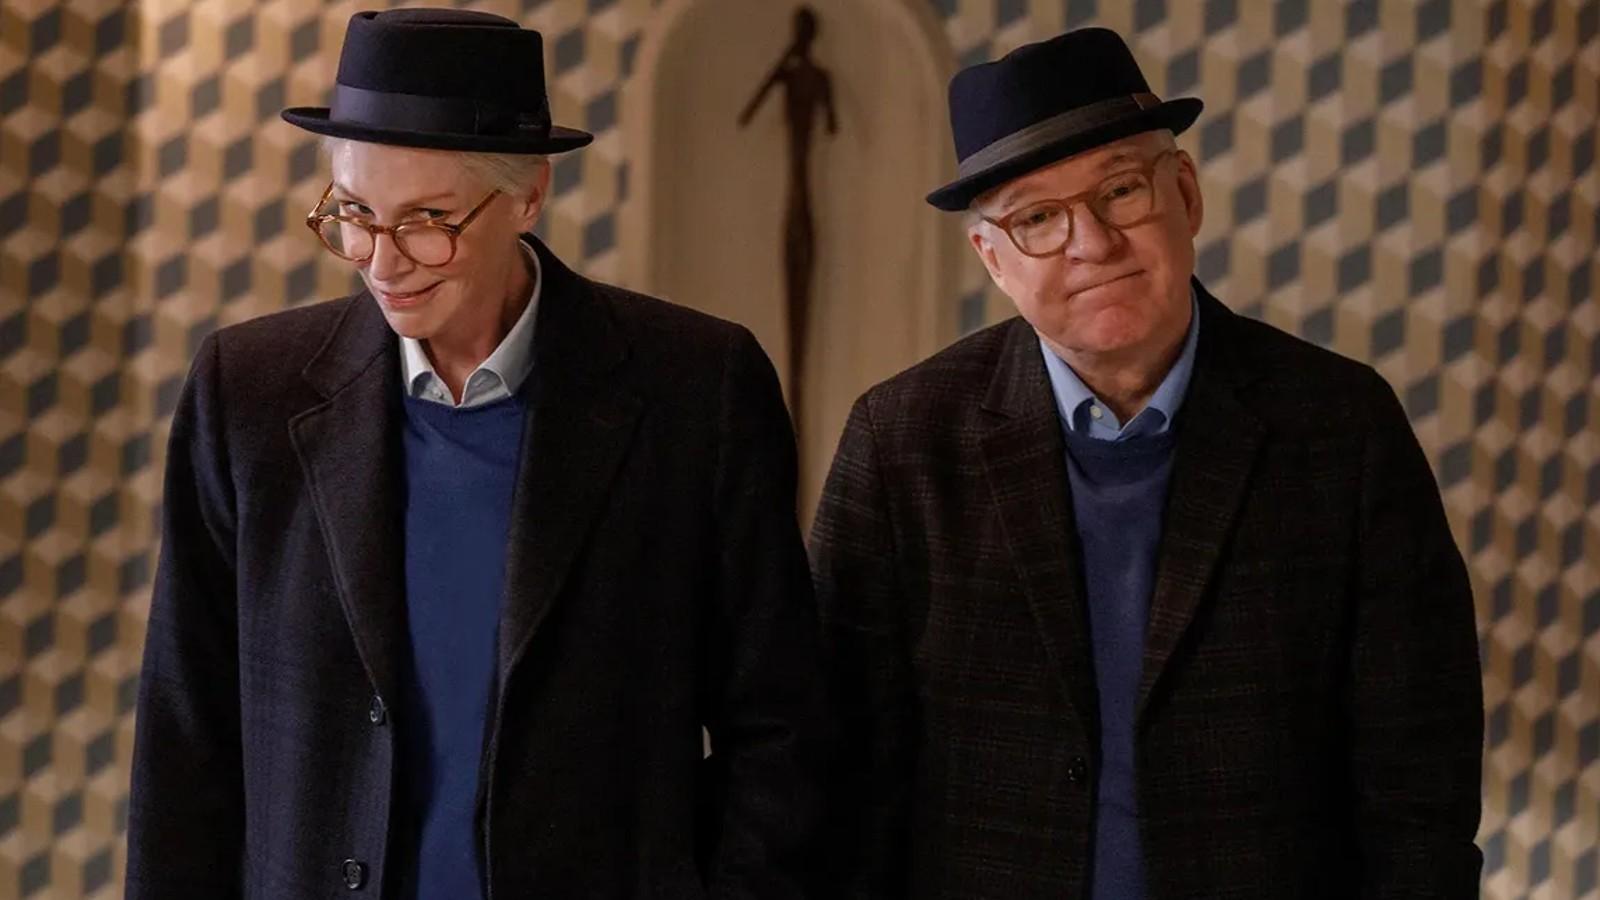 Jane Lynch and Steve Martin dressed the same in Only Murders in the Building.